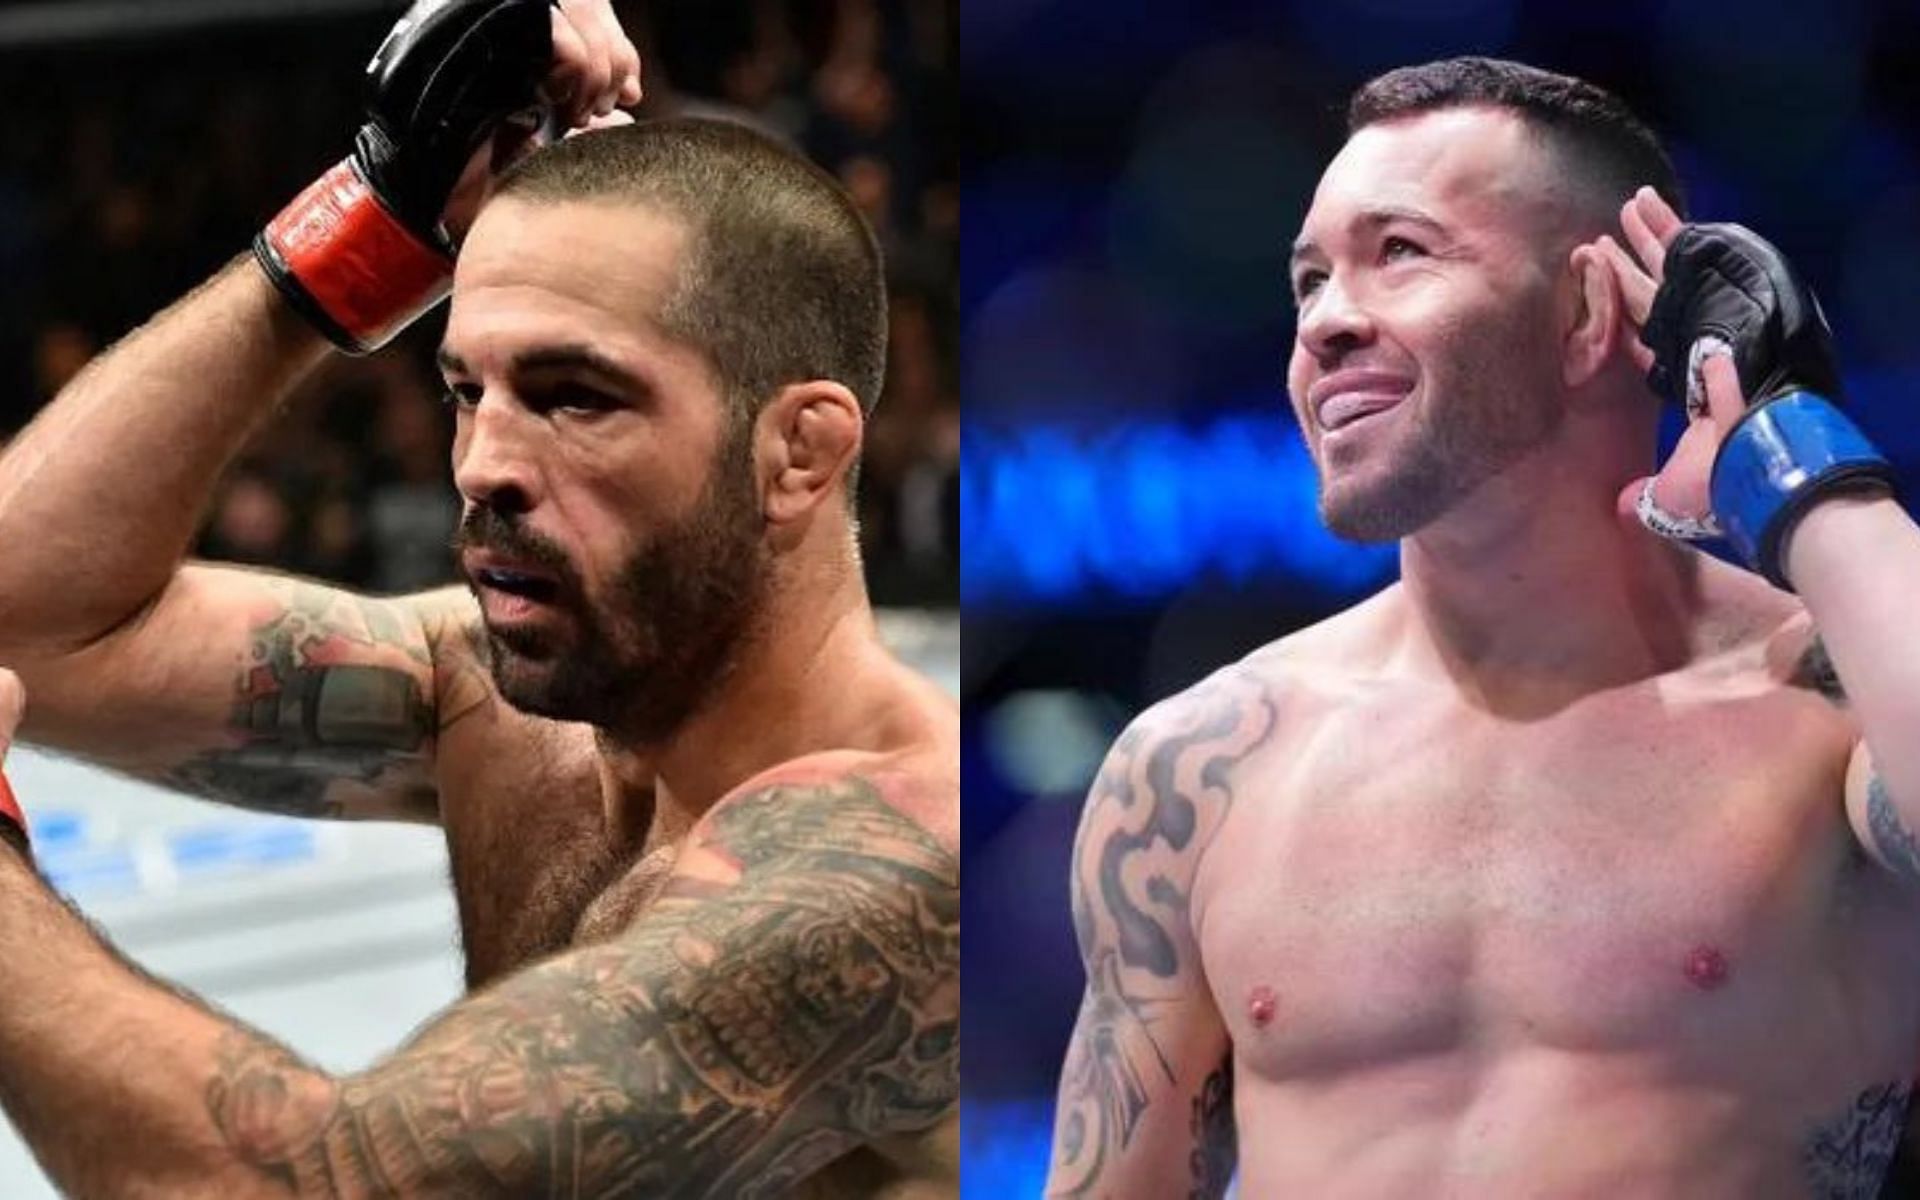 Matt Brown (left) and Colby Covington (right) (Image credits @iamtheimmortal and @colbycovmma on Instagram)